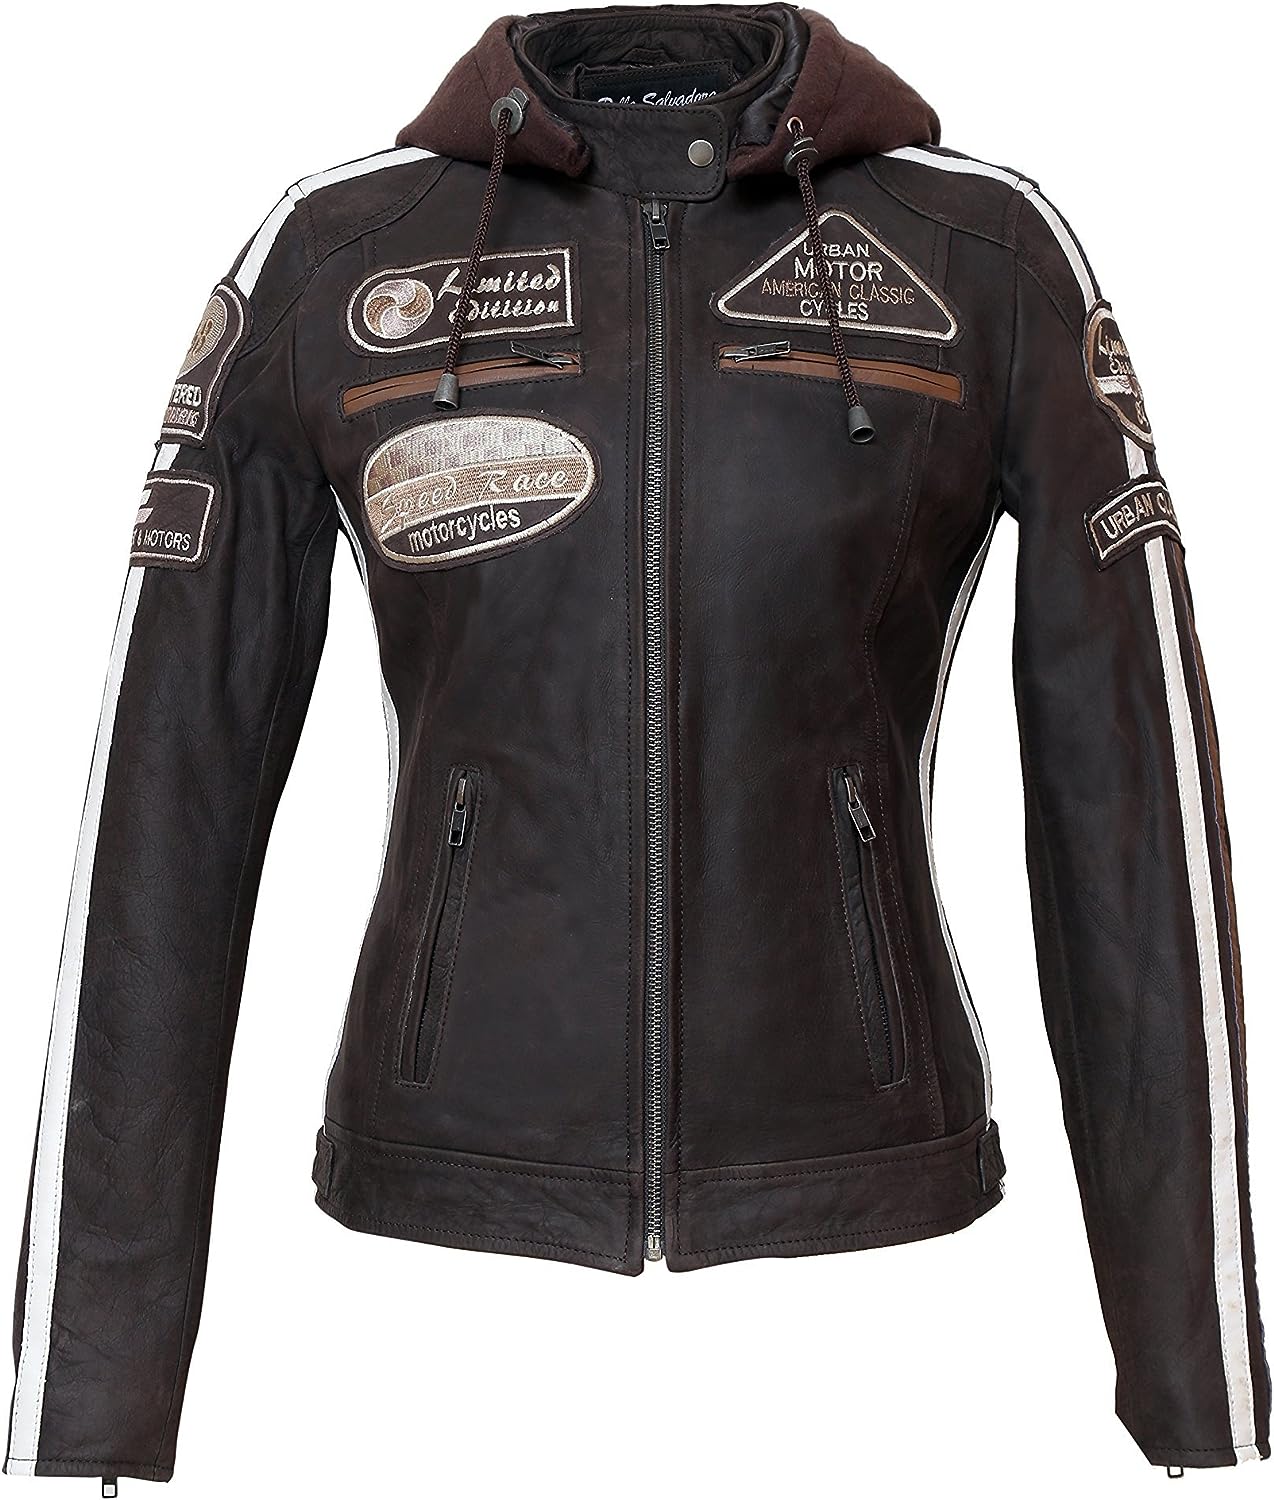 Urban Leather Women's Motorcycle Jacket with Protective Padding, Brown, S/38